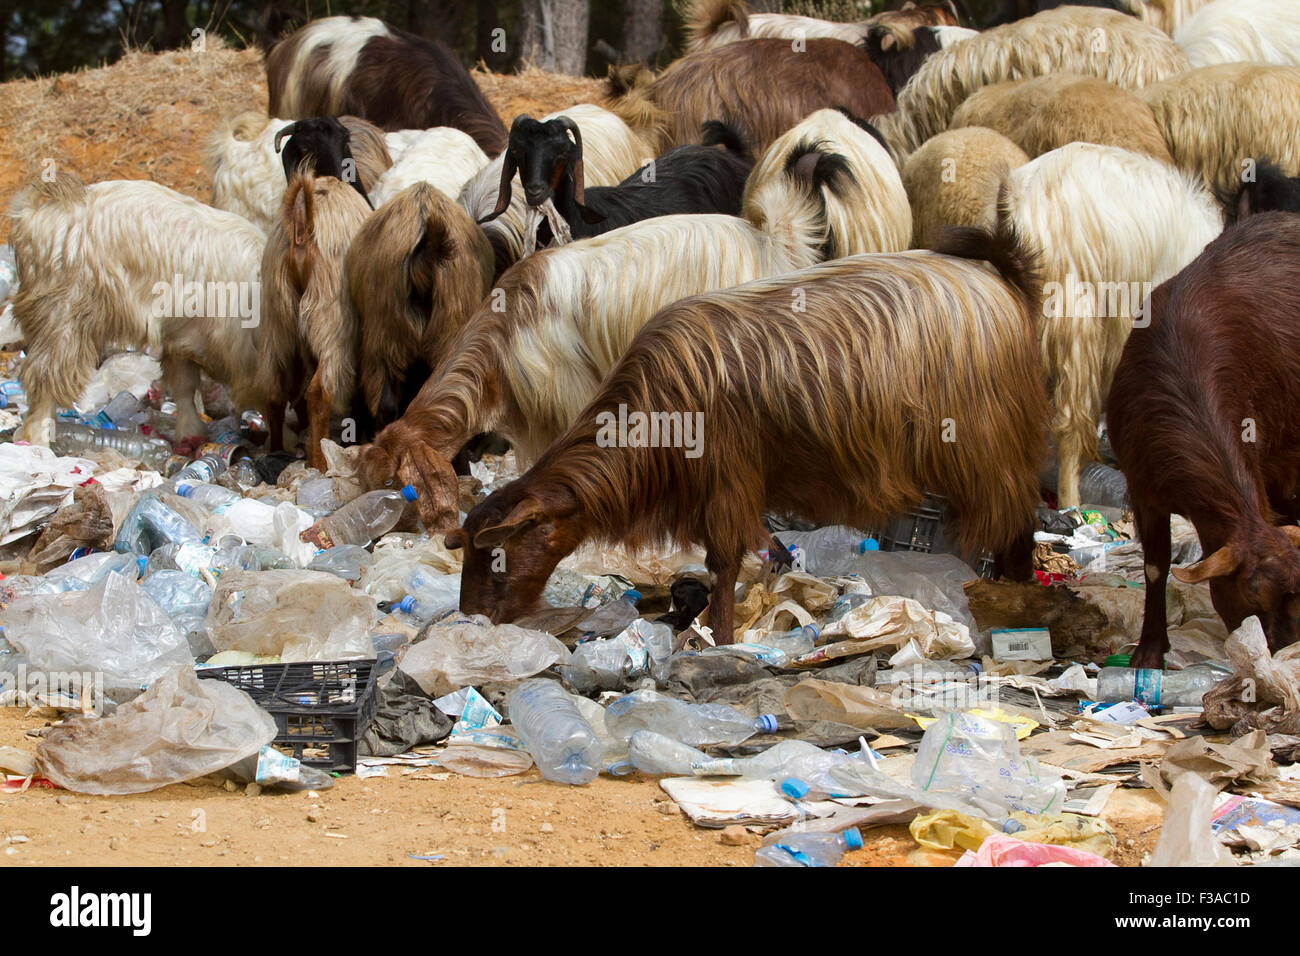 Beirut Lebanon 3rd October 2015. Goats rummaging for food in a rubbish dump and  discarded plastic bottles and bags as local municipalities struggle to cope with the amount of human waste  creating temporary landfill sites. The uncollected rubbish triggered the civil You Stink protest again perceived corruption of politicians Credit:  amer ghazzal/Alamy Live News Stock Photo